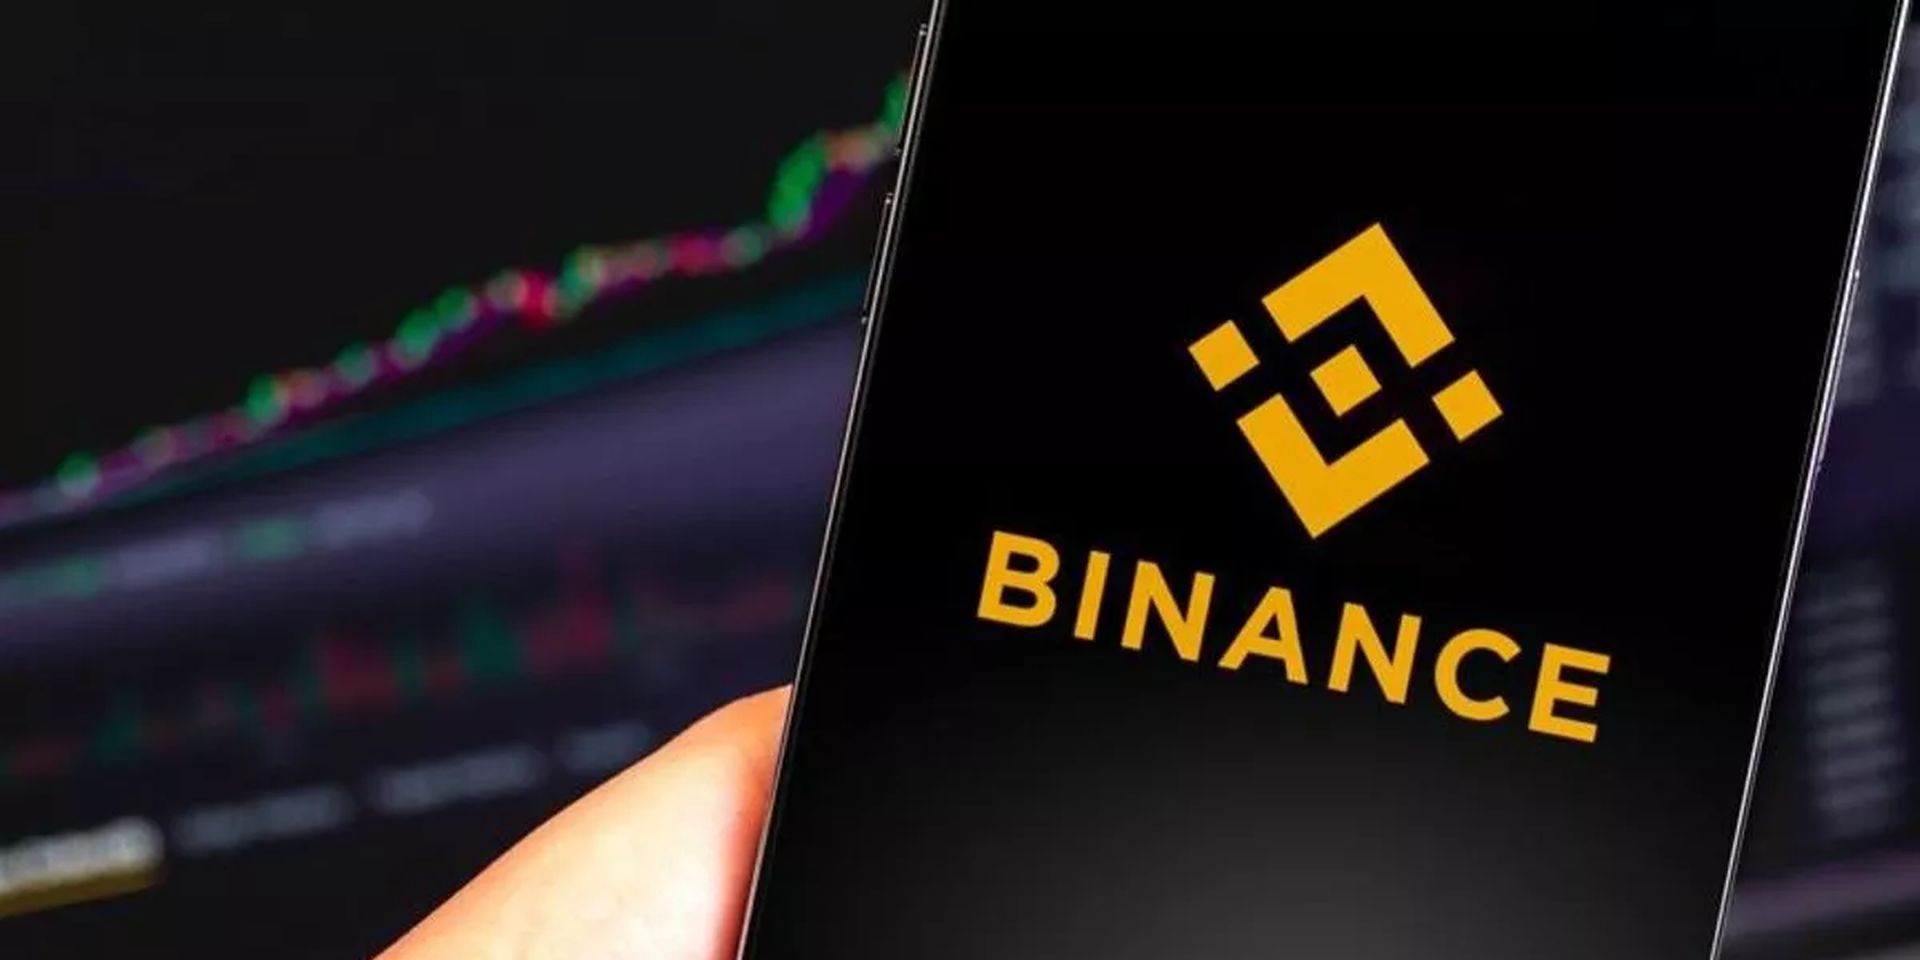 In this article, we are going to be covering TrueFi Binance quiz answers, so you can earn 10 TRU coins for free while you are learning more about crypto.